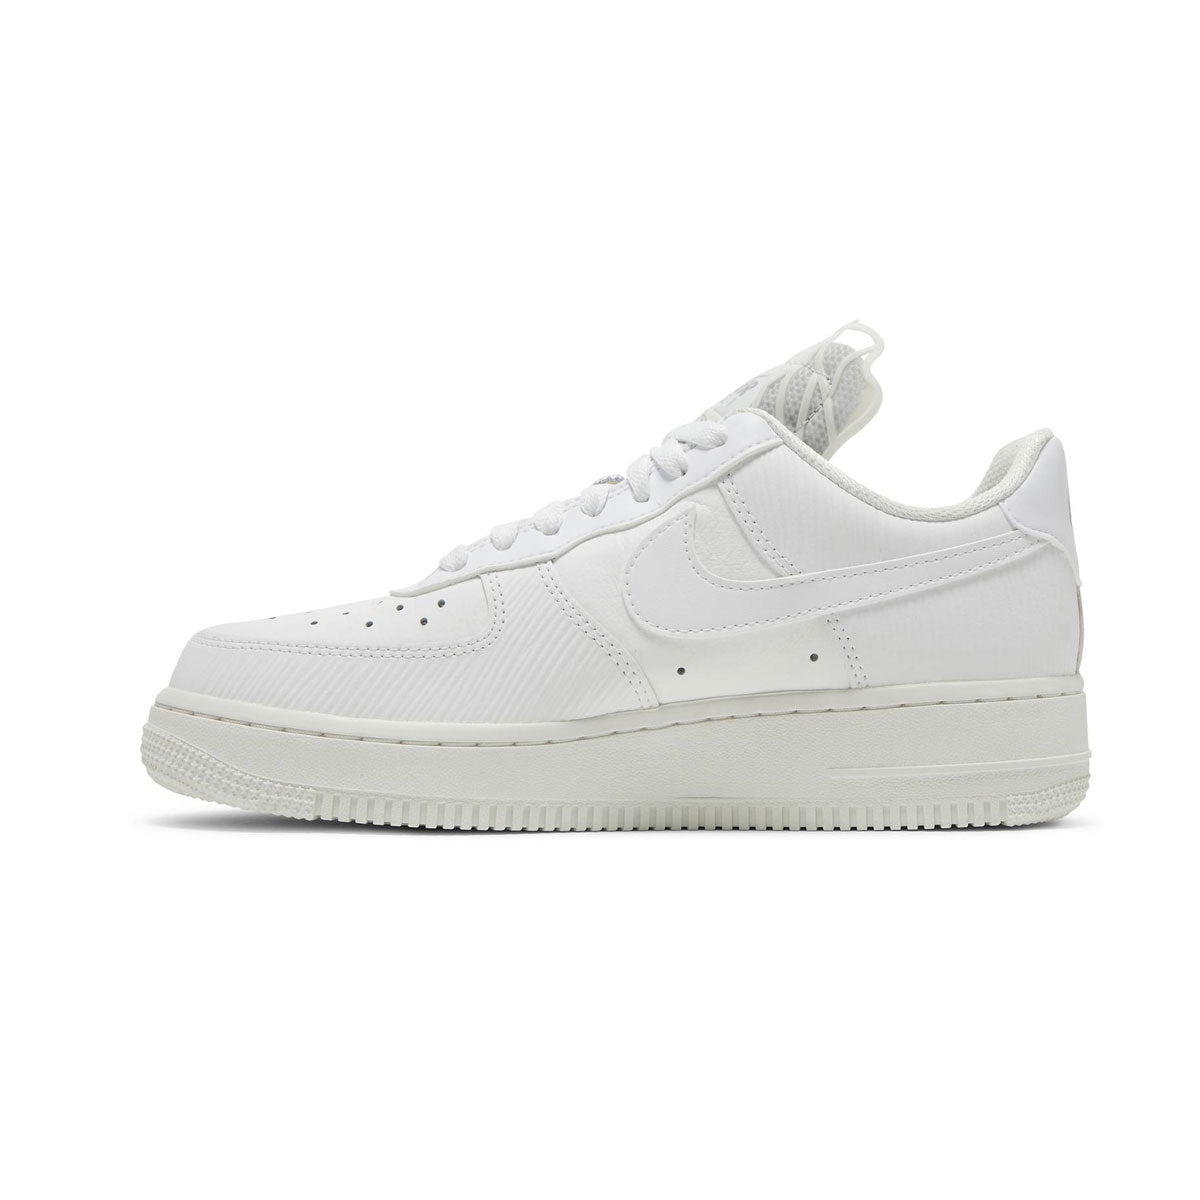 Nike Women's Air Force 1 Low Goddess of Victory